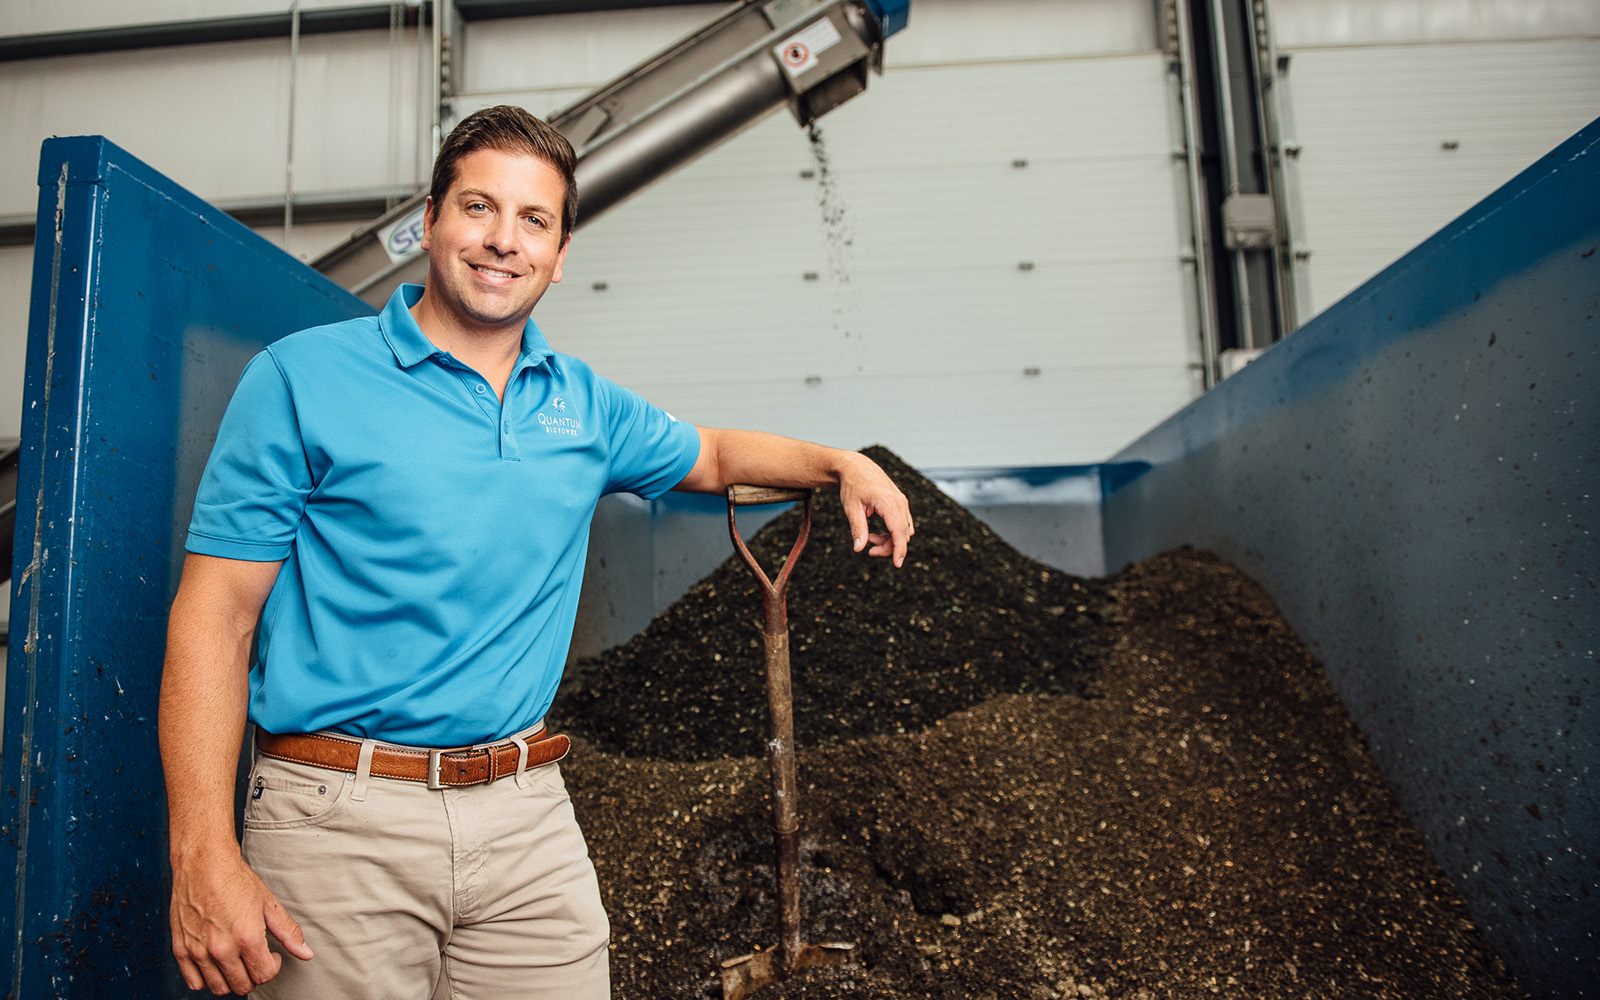 Brian Paganini '03, vice president and managing director of Quantum Biopower, was honored by the Hartford Business Journal as a "40 Under Forty" award recipient earlier this month. (Nathan Oldham/UConn School of Business)